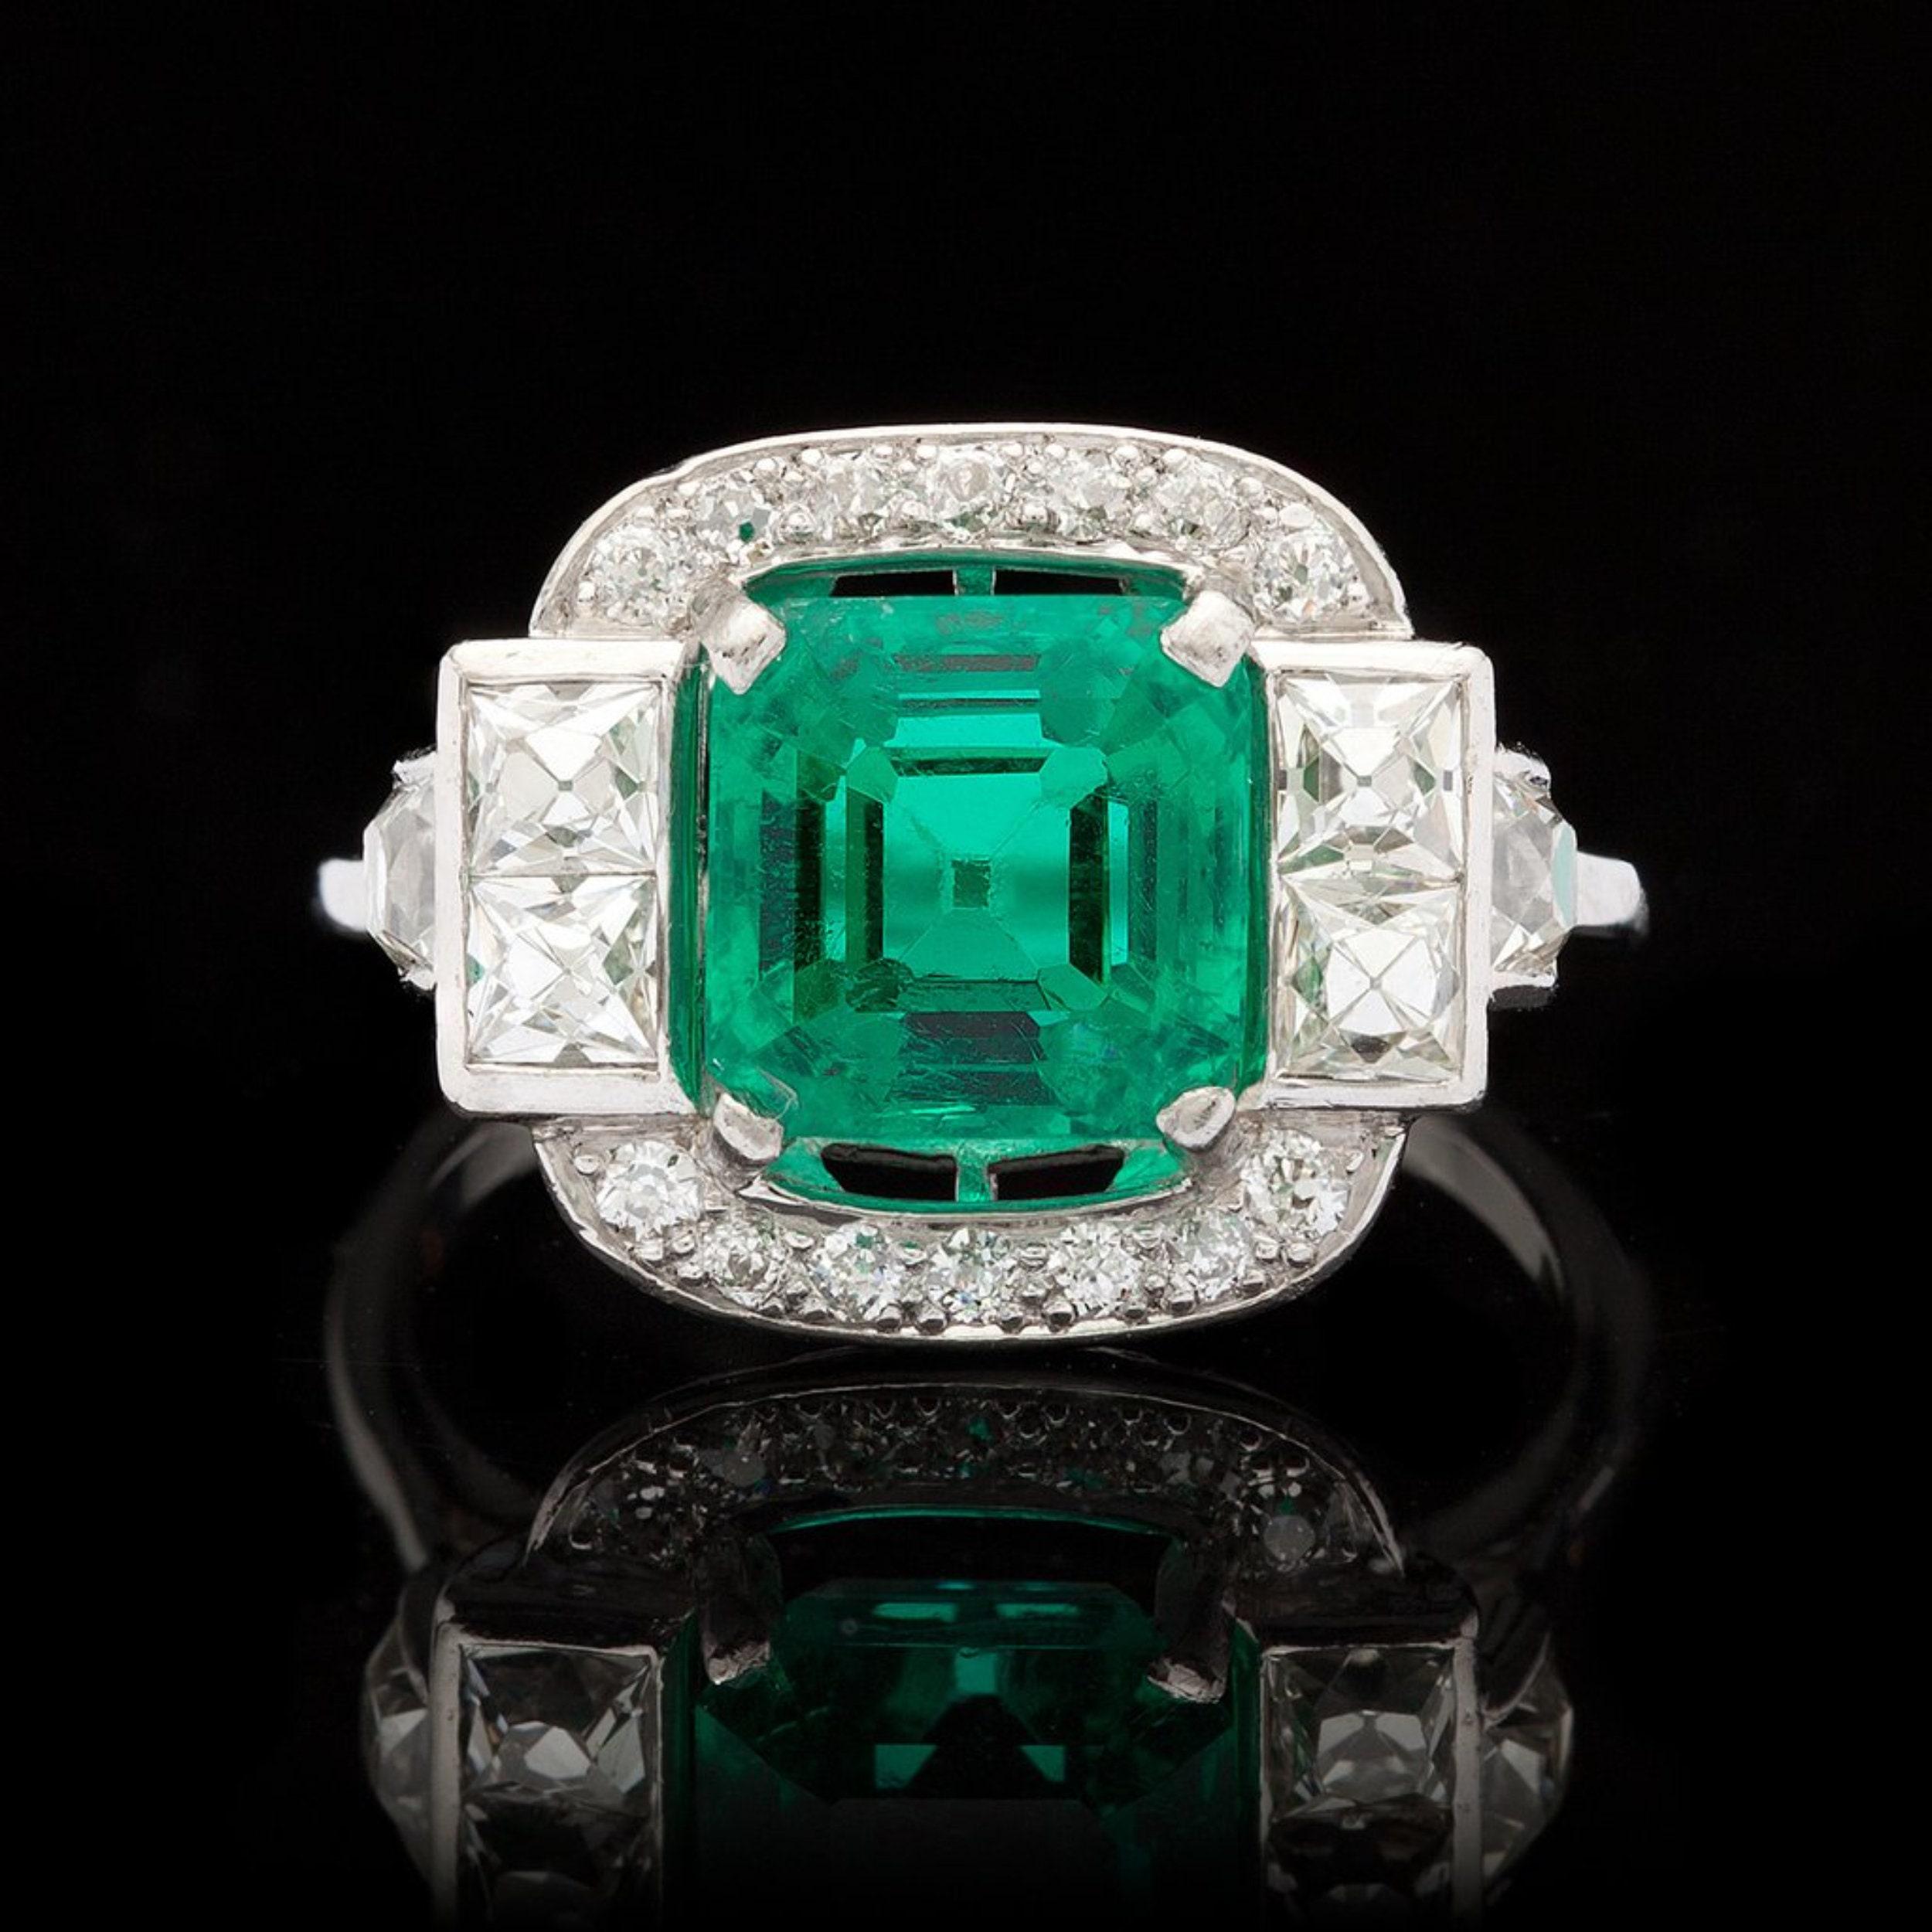 For Sale:  2 Carat Natural Colombian Emerald Engagement Ring White Gold Diamond Bridal Ring 4